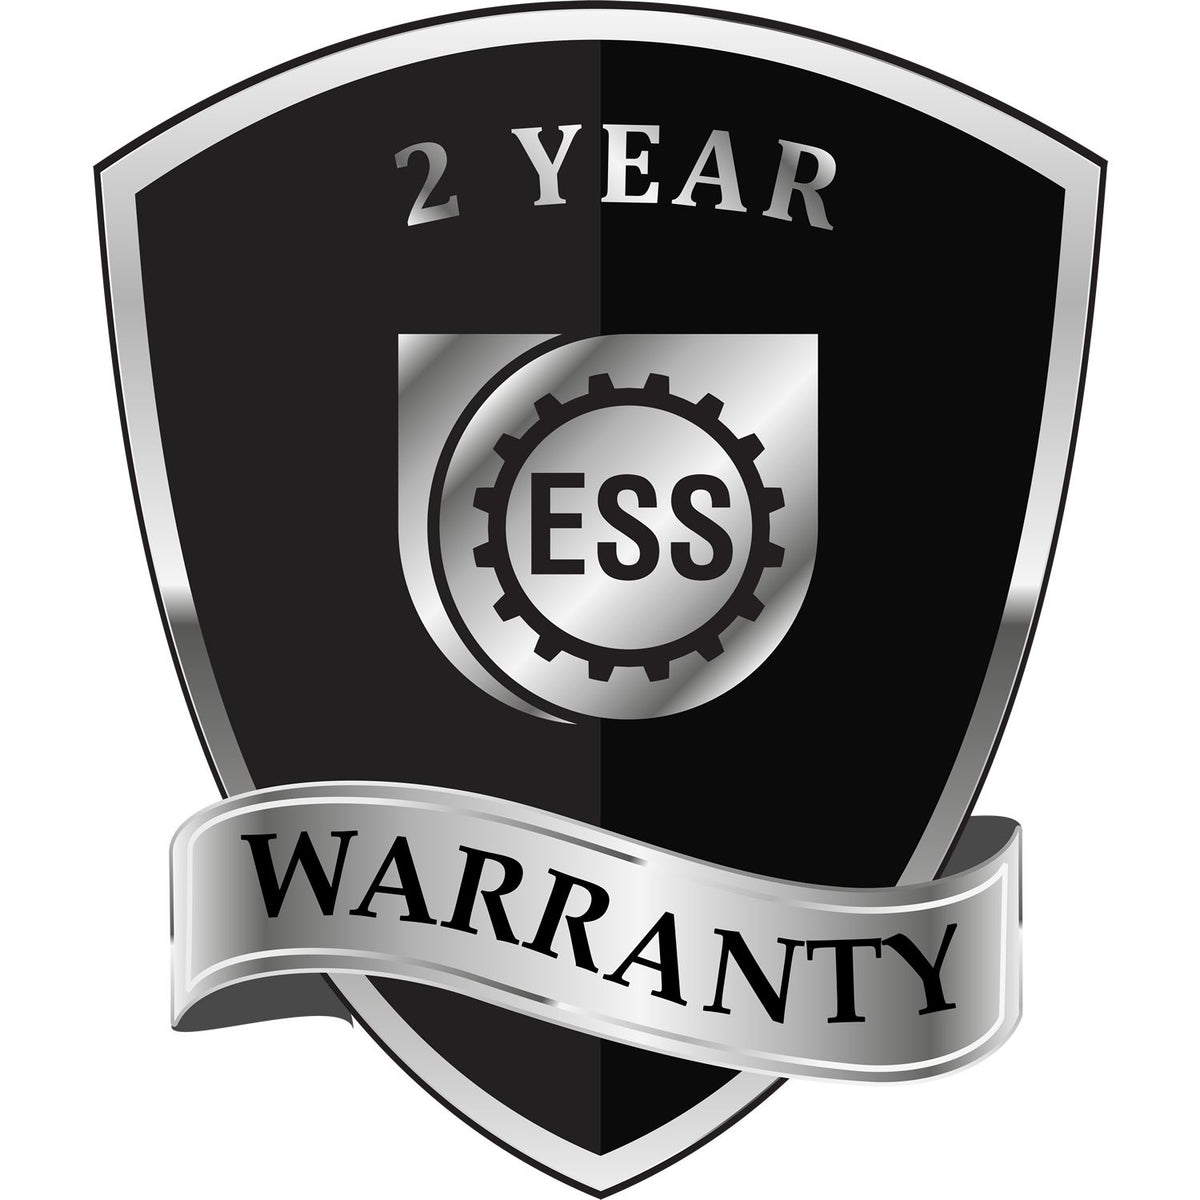 A black and silver badge or emblem showing warranty information for the Heavy Duty Cast Iron Idaho Geologist Seal Embosser